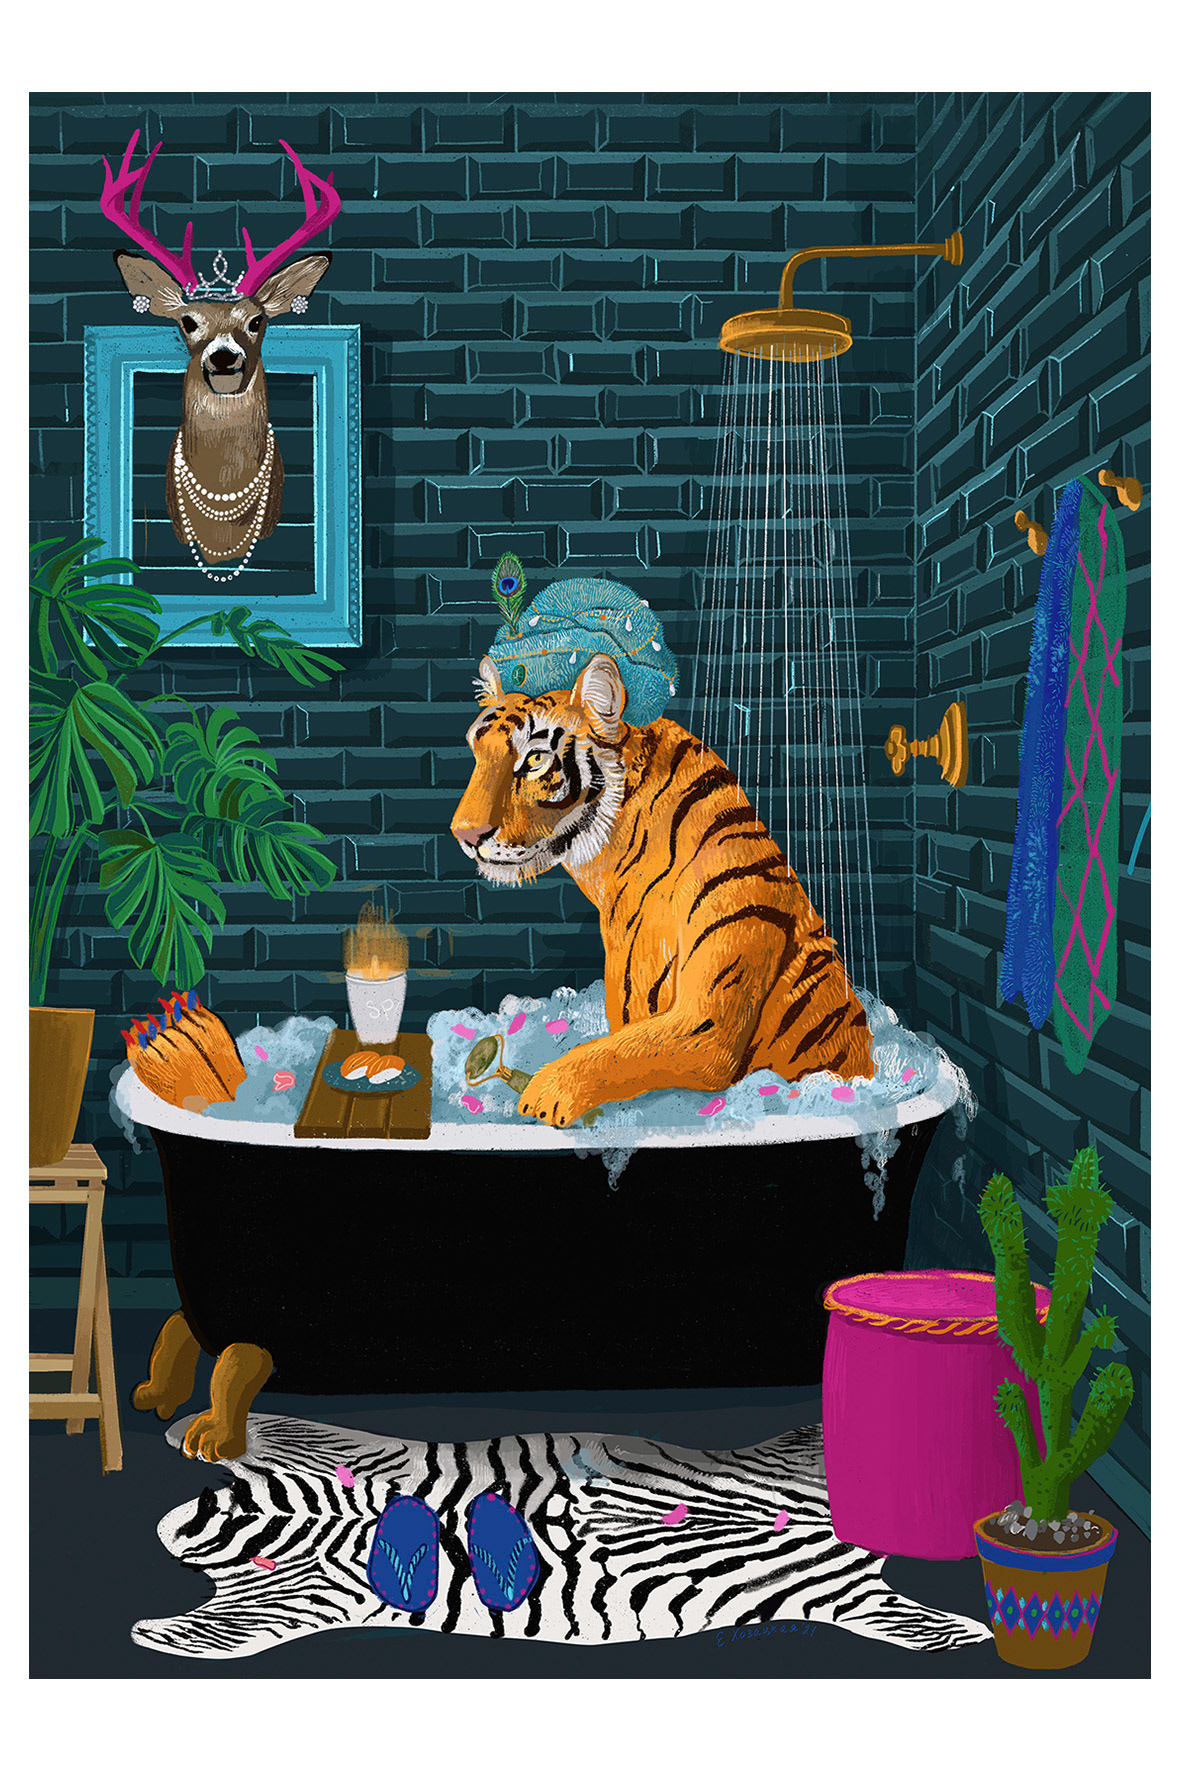 2022 new year bathroom cards hold that tiger illustrations Lana del ray Lunar New Year Procreate tigers underground